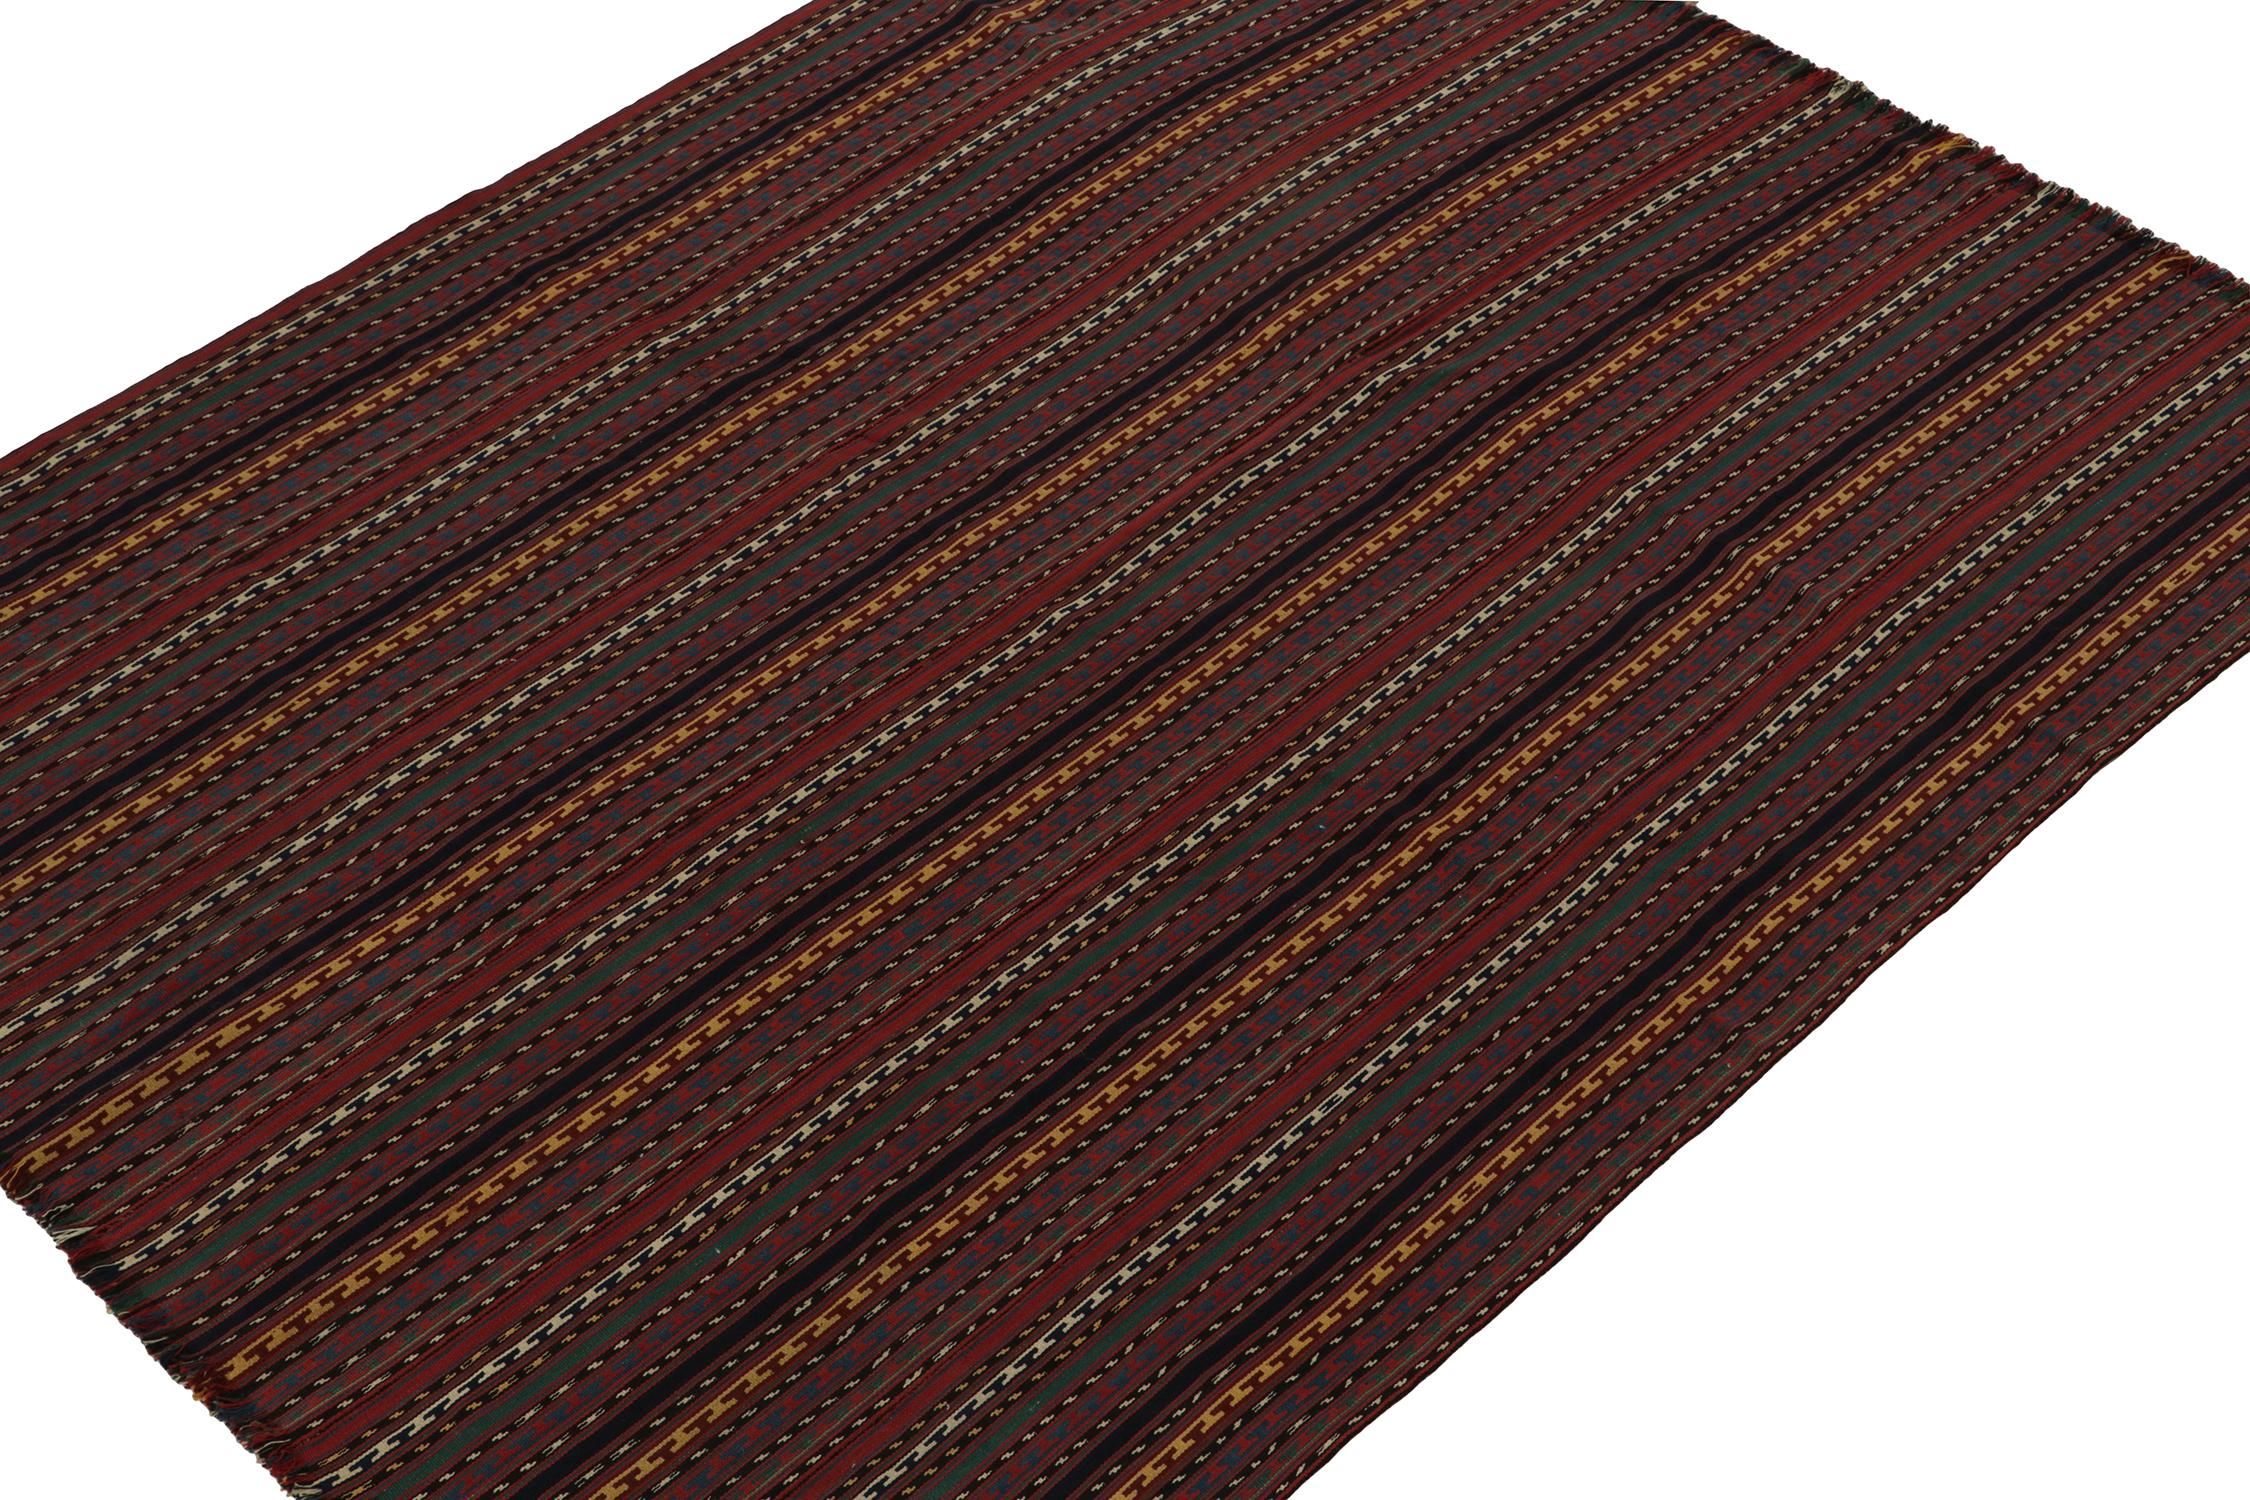 This vintage 6x7 Persian kilim is a Jajim style curation, handwoven in wool circa 1950-1960. 

Further on the Design:

This rich repeat design prefers brick red, forest green, gold and black in a gorgeous yet simple play of polychromatic